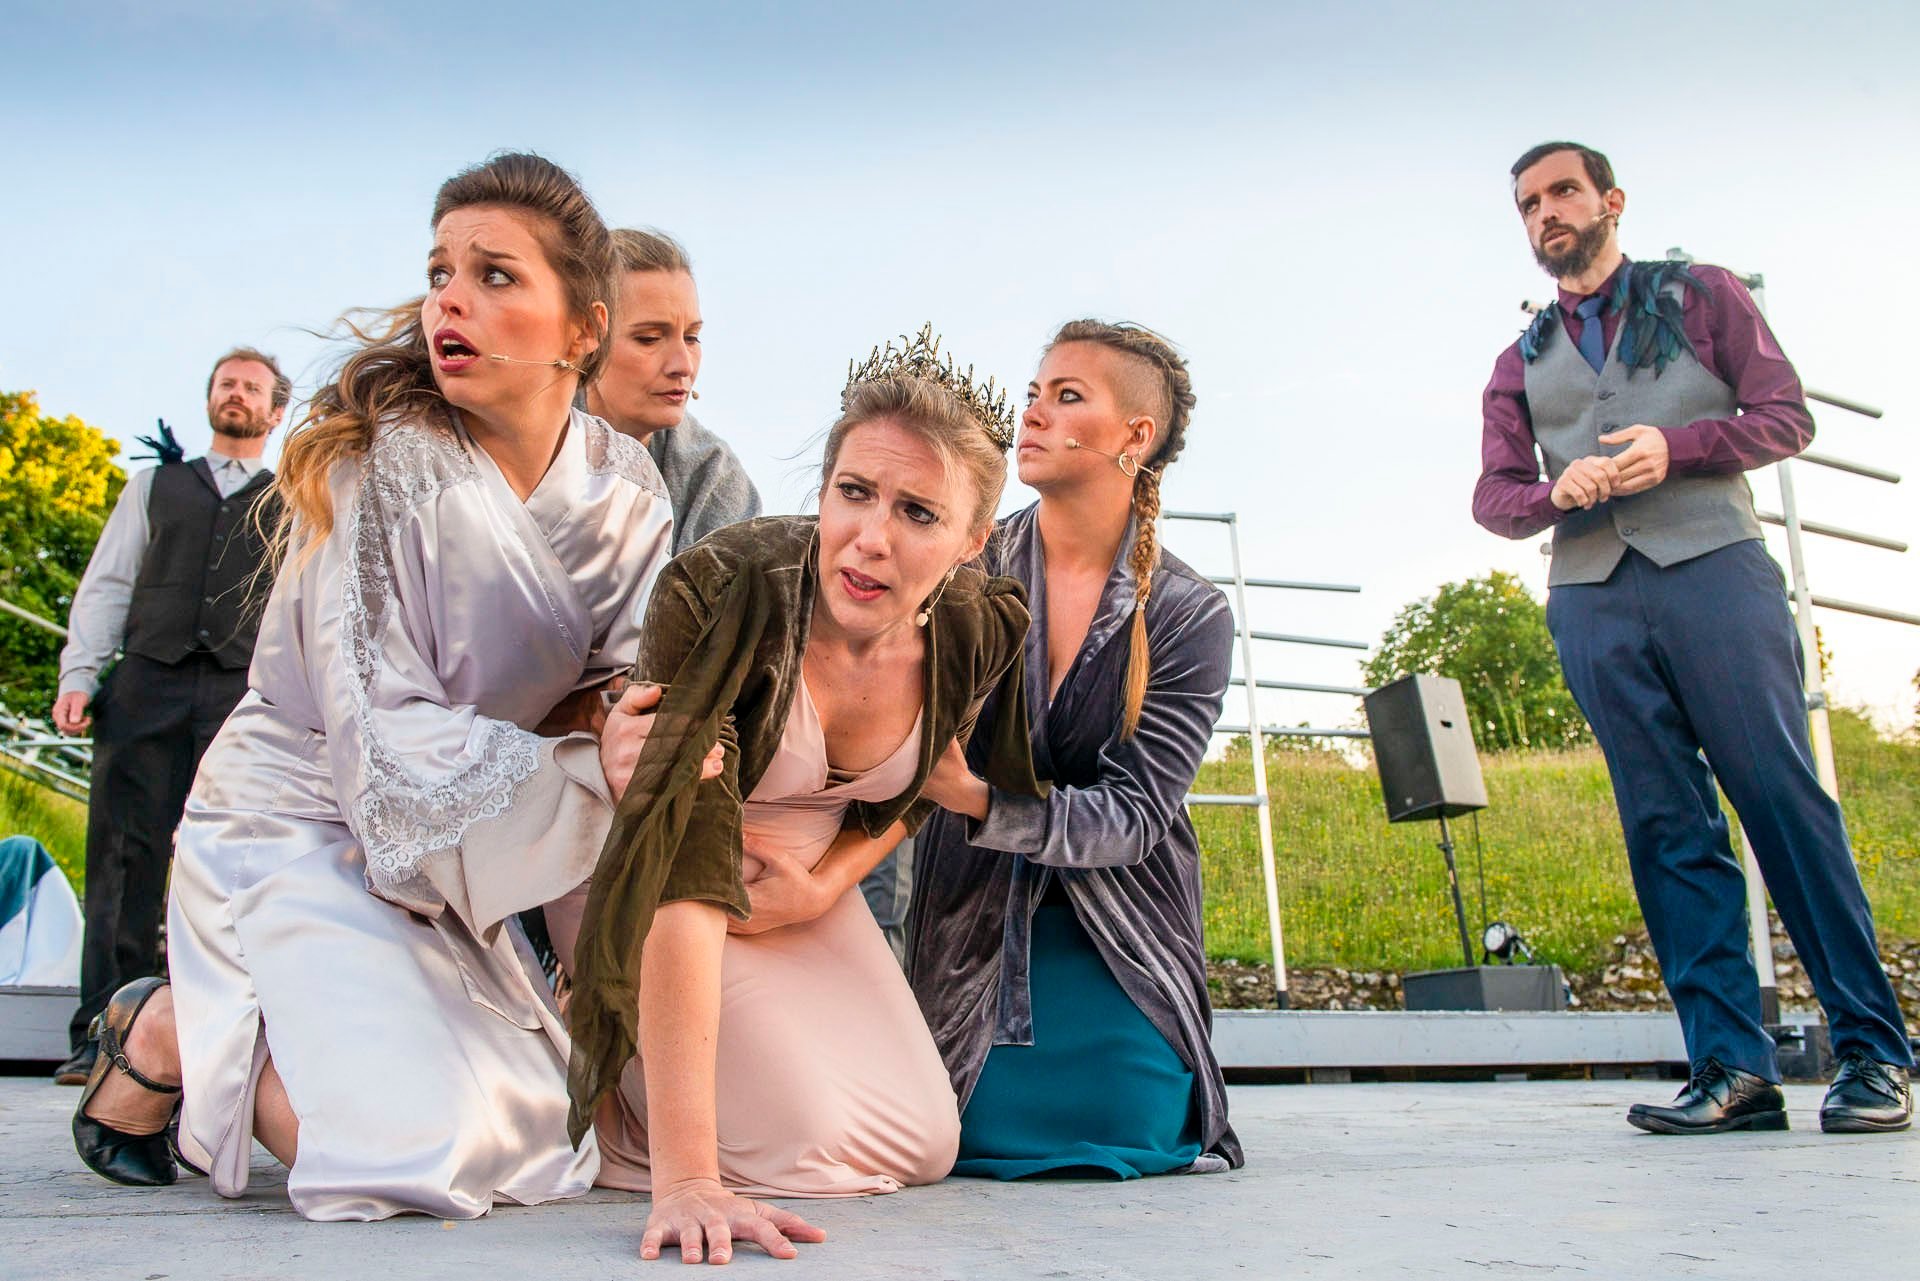 Photographs from The Maltings Theatre performing Shakespeare's The Winter's Tale in the incredible Verulamium outdoor roman theatre in St Albans.